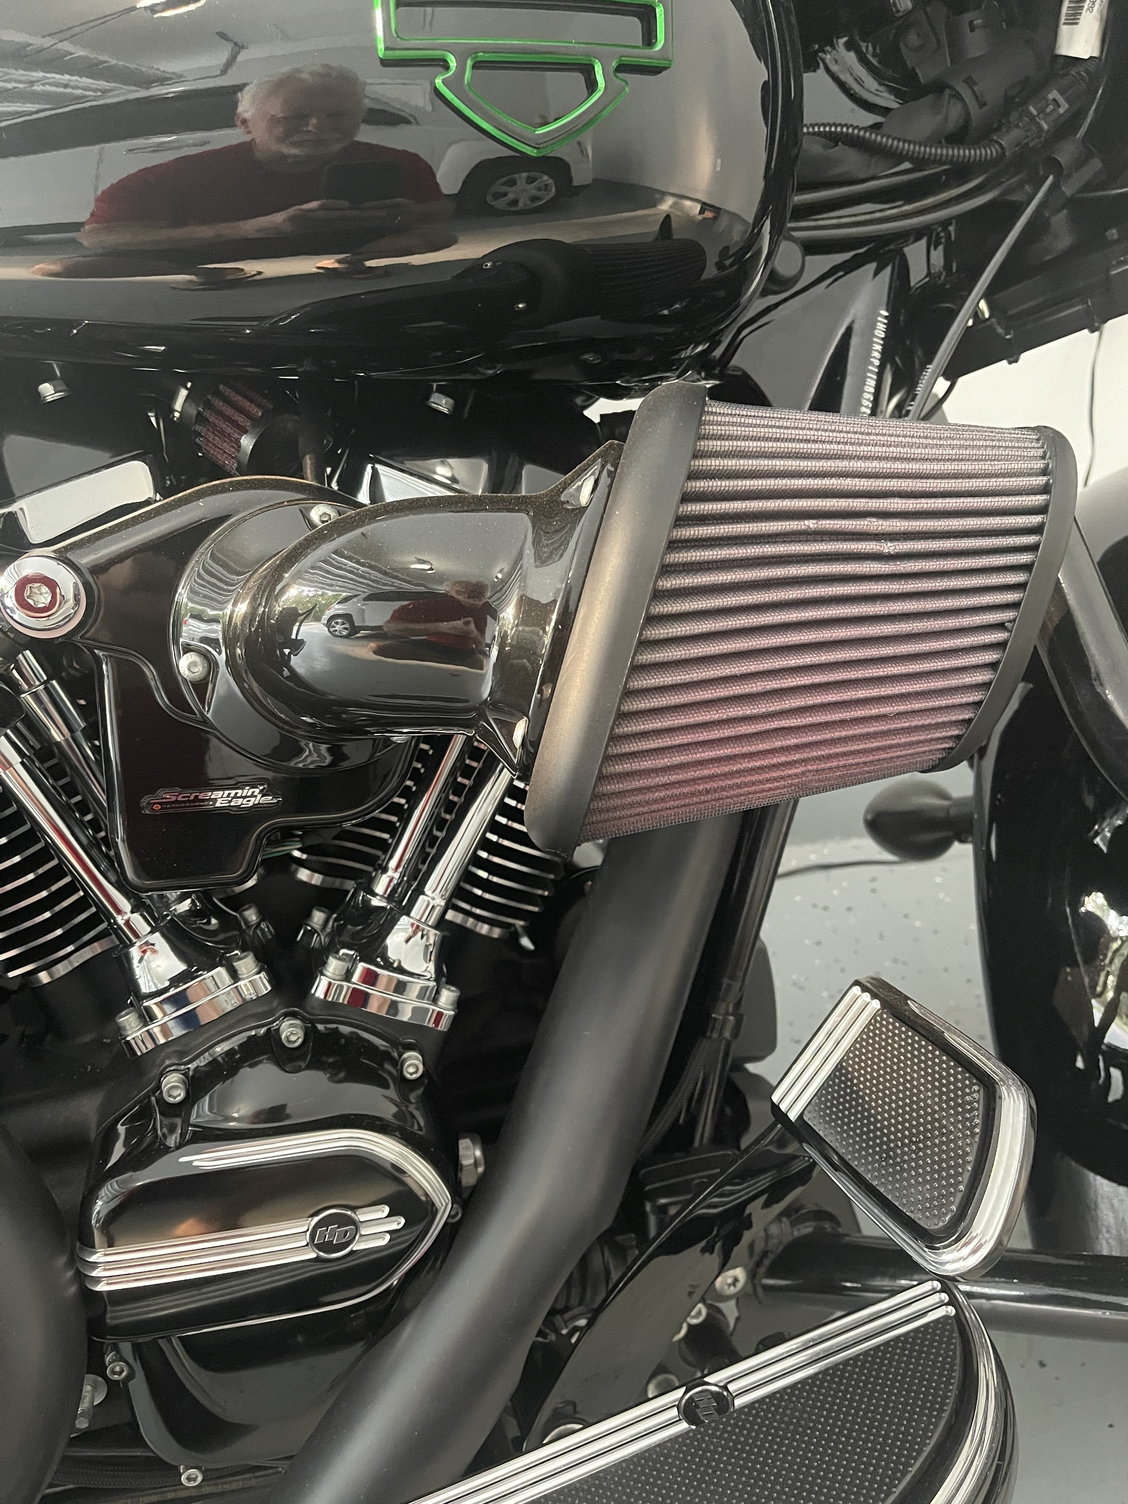 Screamin' Eagle Heavy Breather Extreme Air Cleaner - Harley Davidson Forums